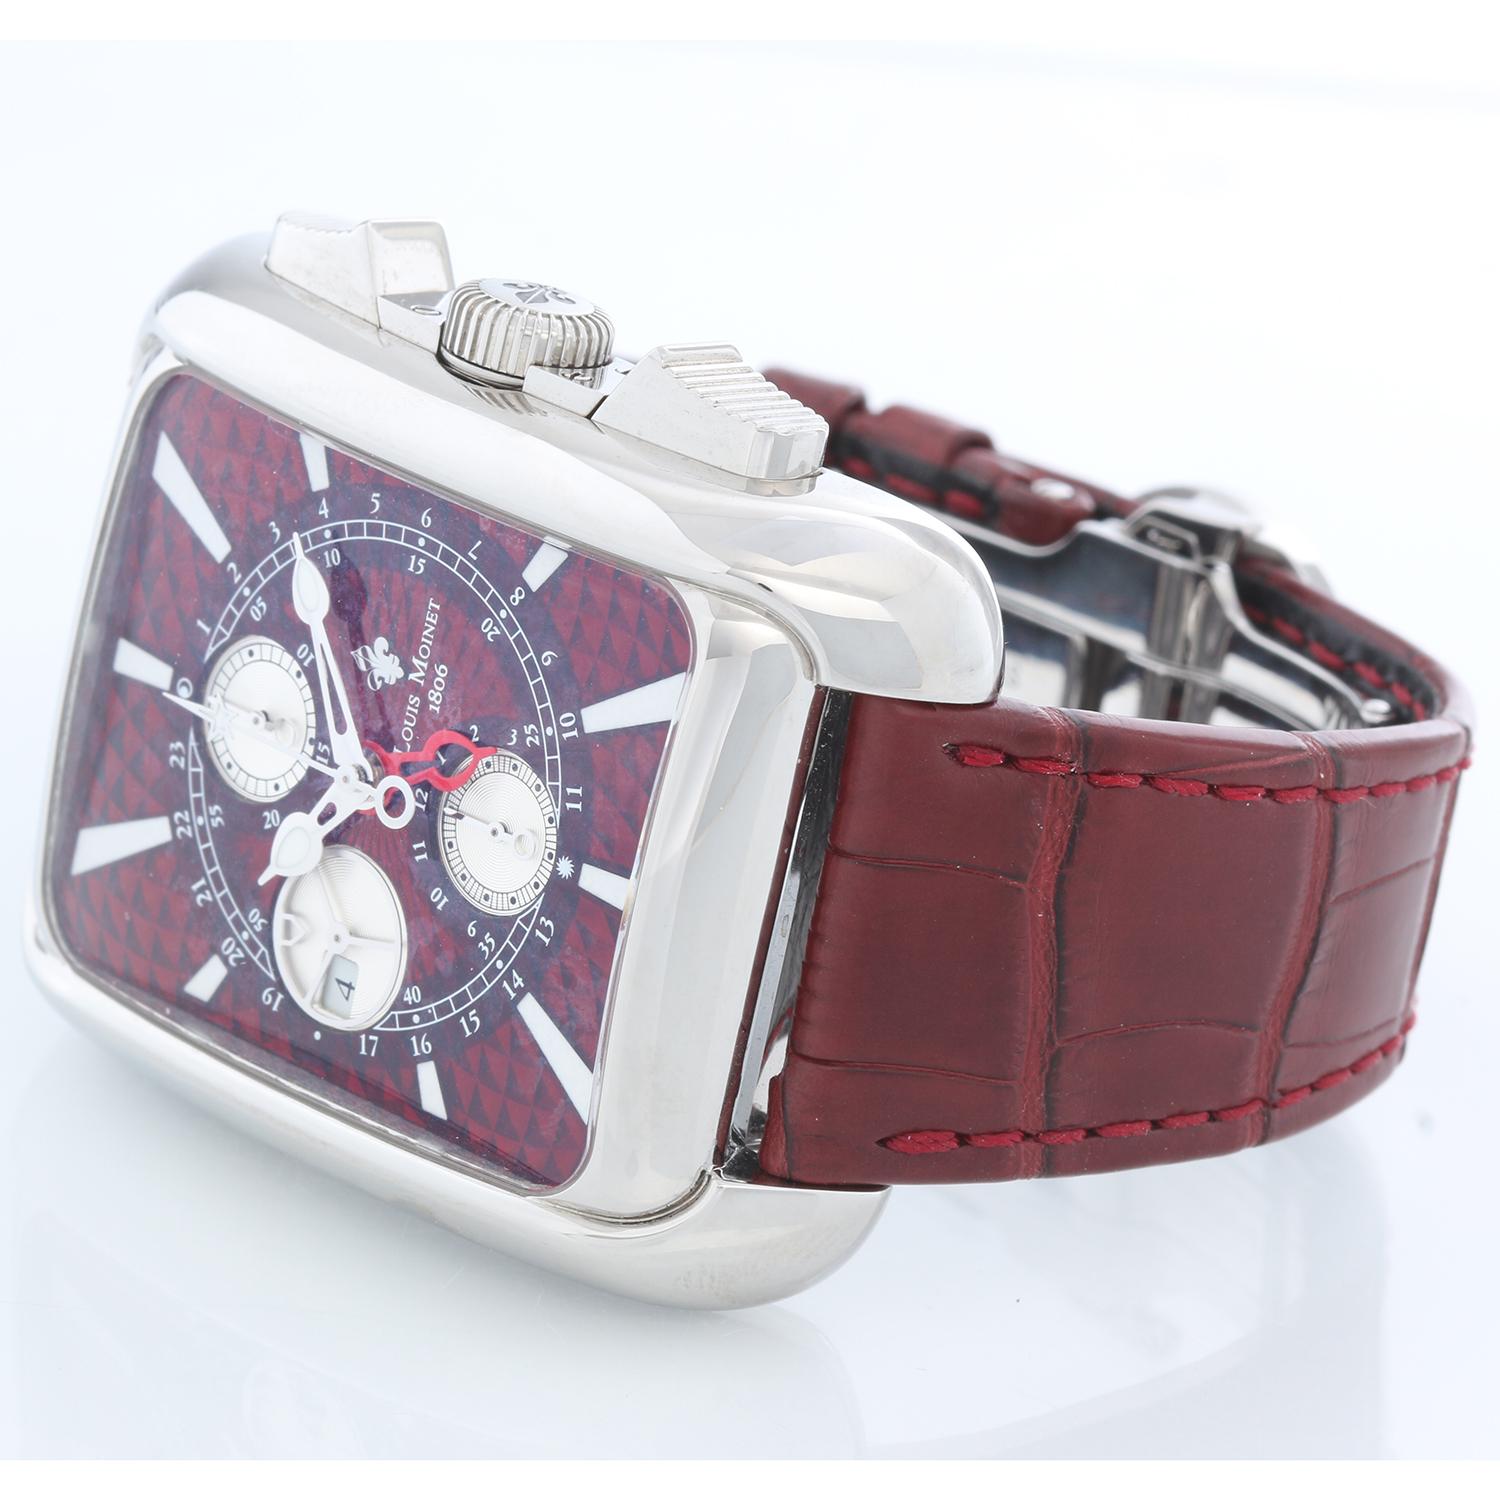 Louis Moinet Men's 40mm Twintech Automatic GMT Men's Watch LM.162.10.12 - Automatic winding. Stainless steel ( 40 mm ). Red hologram dial with 3 subdials; GMT function, date at 9 o'clock. Burgundy leather strap with Louis Moinet Deployant clasp.